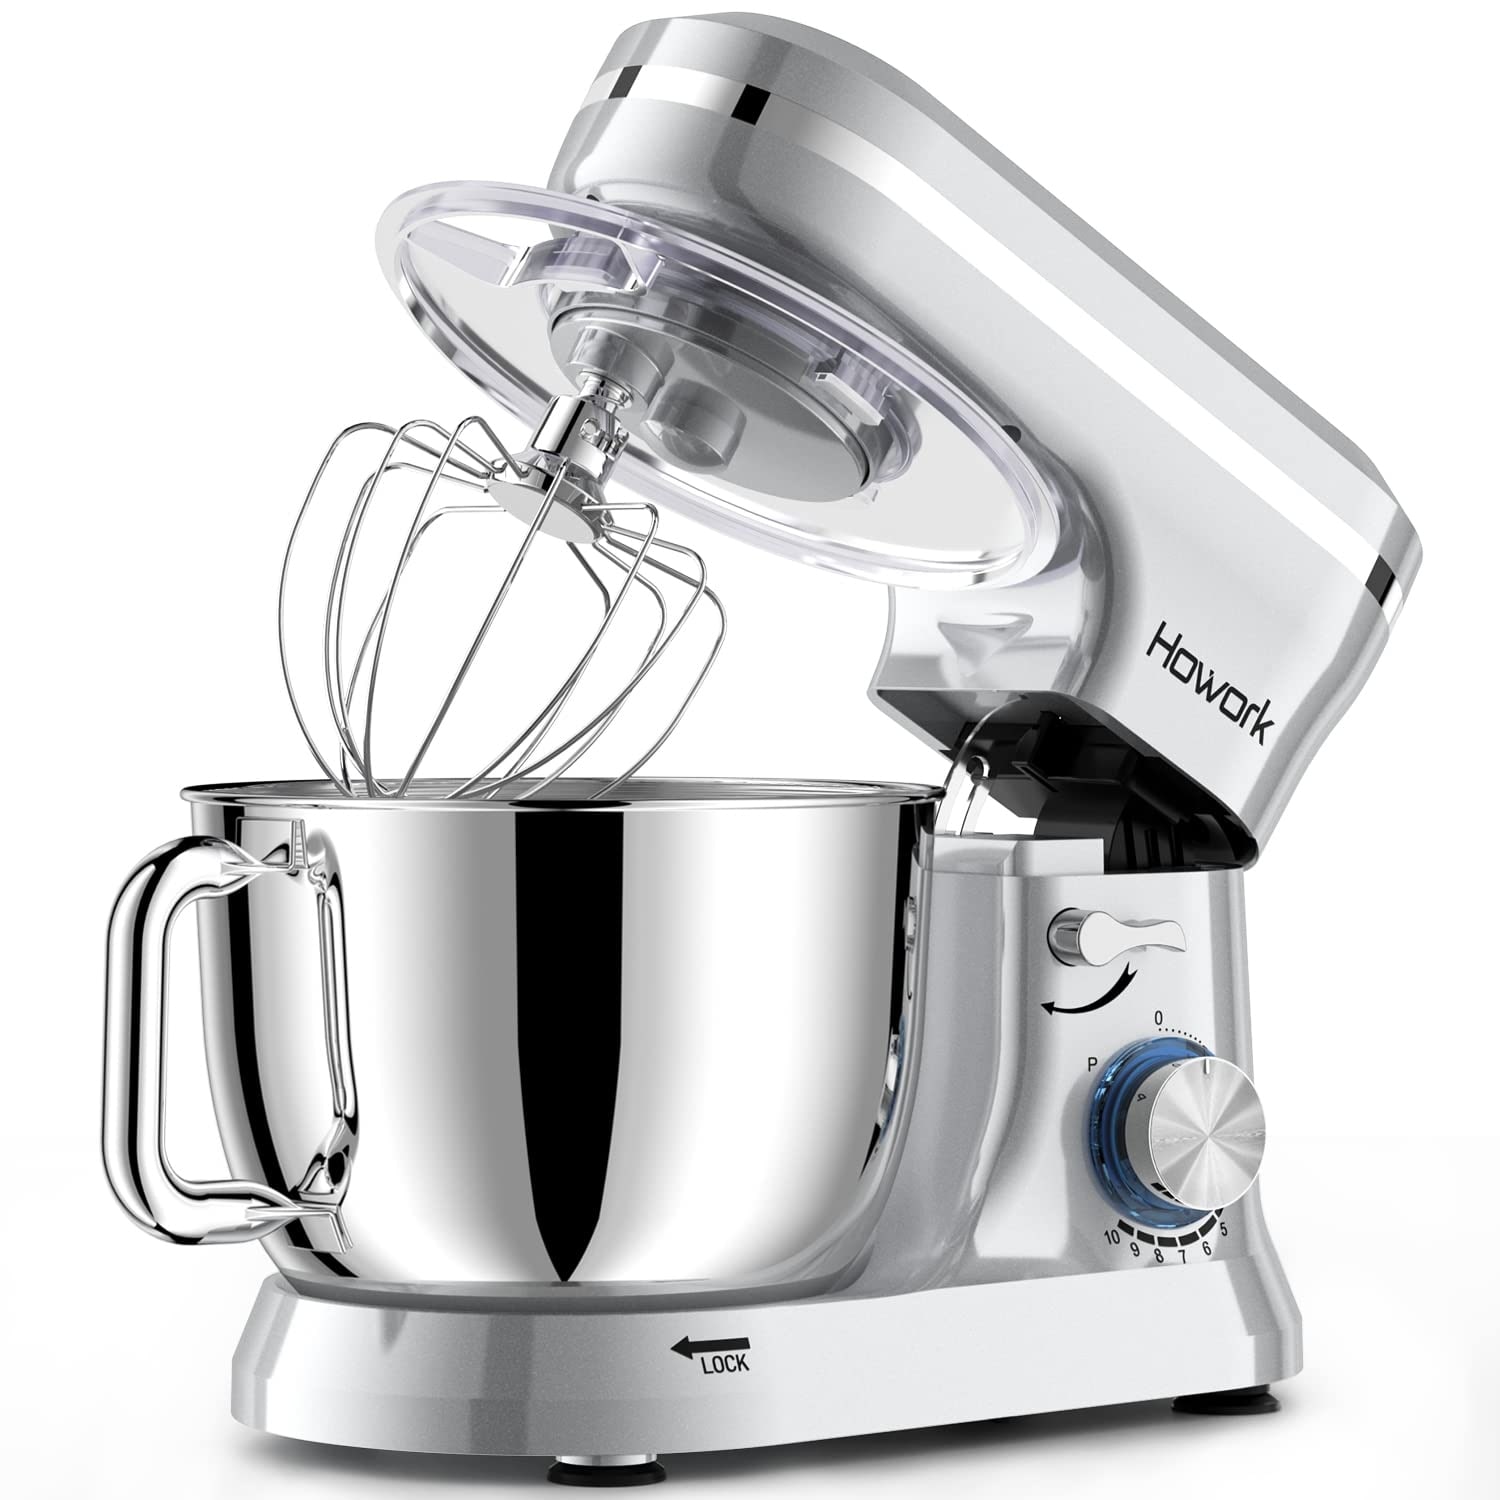 https://ak1.ostkcdn.com/images/products/is/images/direct/0728195b38e3e8e6699f1b53bab6de46309e28e0/Electric-Stand-Mixer%2C10%2Bp-Speeds-With-6.5QT-Stainless-Steel-Bowl%2CDough-Hook%2C-Wire-Whip-%26-Beater%2Cfor-Most-Home-Cooks.jpg